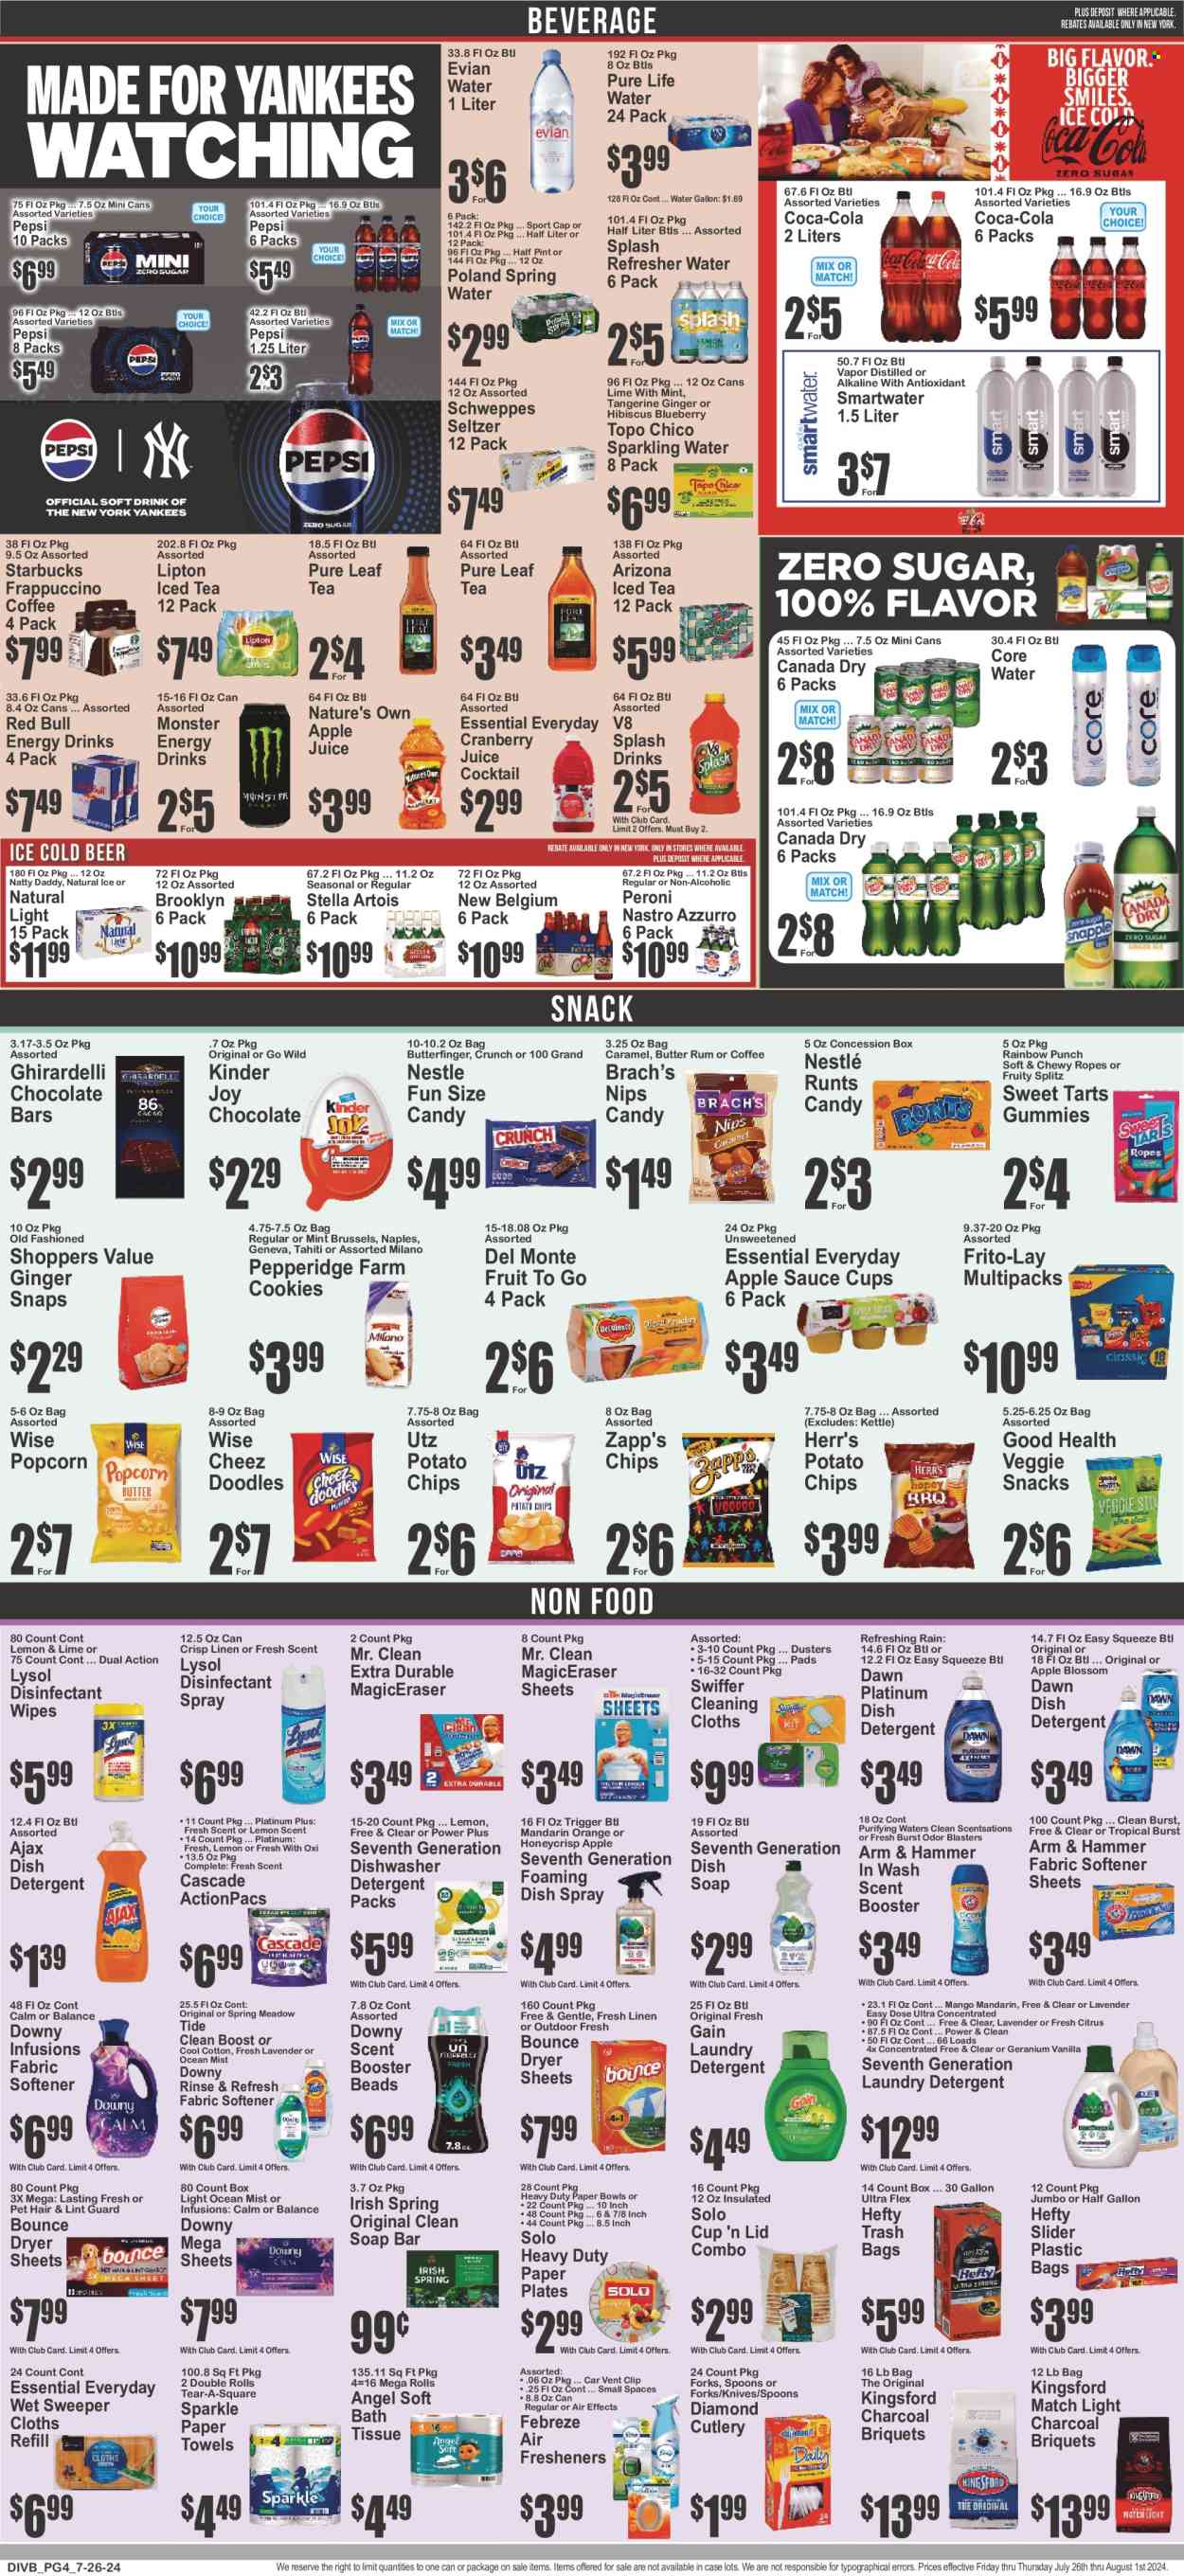 thumbnail - Food Universe Flyer - 07/26/2024 - 08/01/2024 - Sales products - tart, mandarines, snack, Kingsford, Blossom, cookies, Nestlé, Kinder Joy, Ghirardelli, NIPS, chocolate bar, Candy, sweets, gummies, potato chips, popcorn, Frito-Lay, salty snack, ARM & HAMMER, Del Monte, apple sauce, apple juice, Canada Dry, Coca-Cola, ginger ale, Schweppes, Pepsi, juice, energy drink, Monster, Lipton, ice tea, soft drink, Red Bull, Monster Energy, AriZona, seltzer water, spring water, sparkling water, bottled water, Pure Life Water, Smartwater, Evian, water, carbonated soft drink, Boost, coffee drink, Pure Leaf, coffee, Starbucks, frappuccino, rum, punch, Hard Seltzer, beer, Stella Artois, Peroni, Topo Chico, wipes, bath tissue, kitchen towels, paper towels, detergent, Febreze, Gain, cleaner, antibacterial spray, Lysol, Ajax, Swiffer, Cascade, Tide, fabric softener, laundry detergent, Bounce, dryer sheets, scent booster, Downy Laundry, dishwashing liquid, dishwasher cleaner, dishwasher tablets, refresher, Hefty, trash bags, knife, duster, cloths, lid, spoon, plate, bowl, air freshener, paper plate, paper bowl, charcoal, briquettes, Geranium, outdoor flowers, lavender, Nature's Own. Page 5.